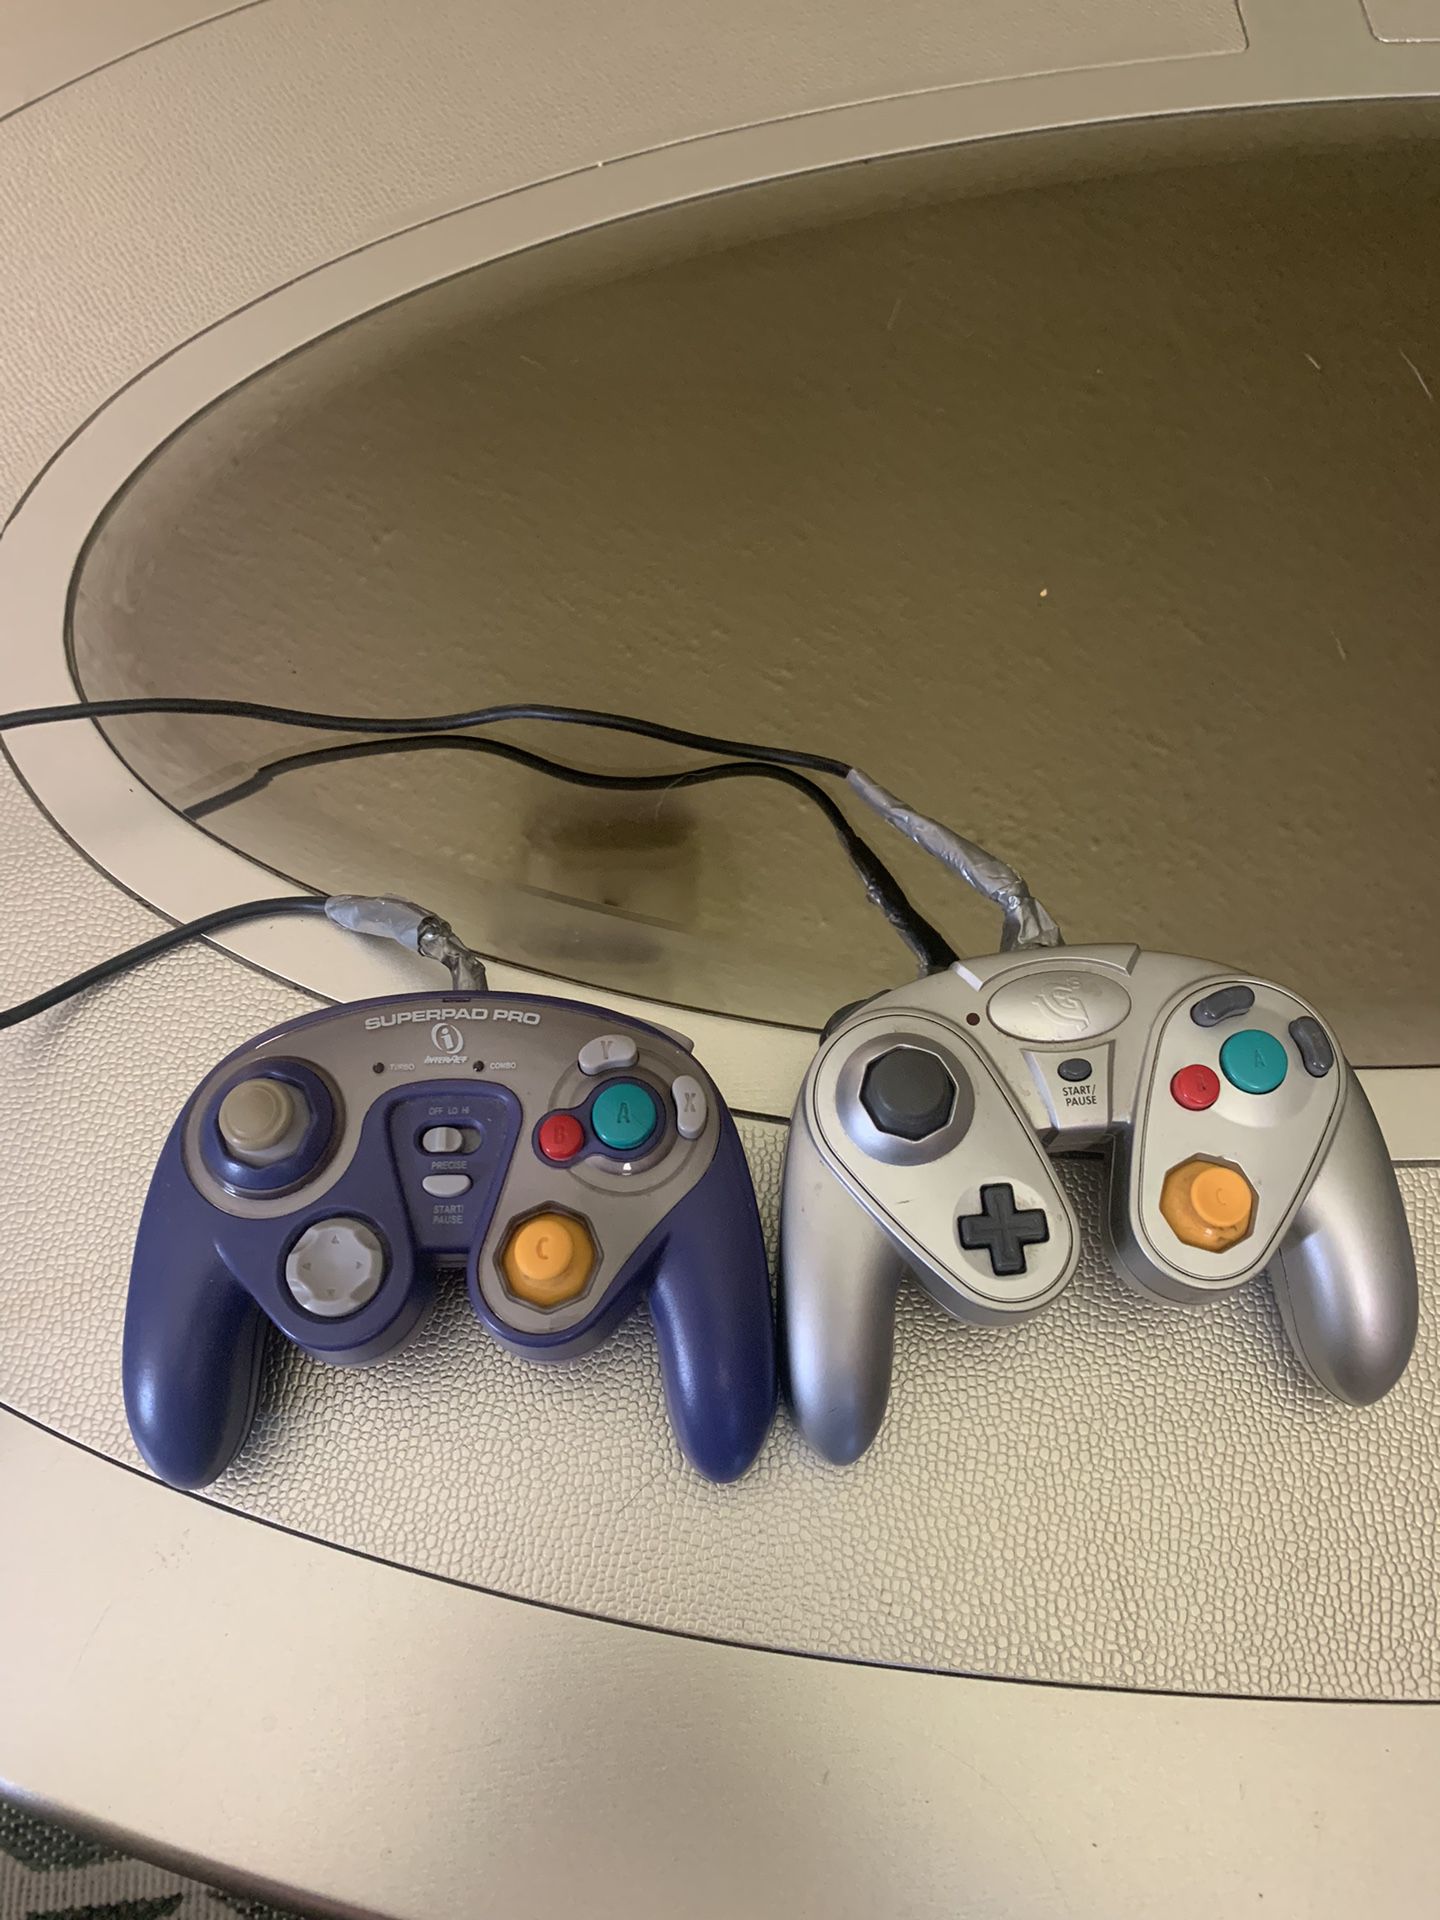 Nintendo GameCube Controllers Tested